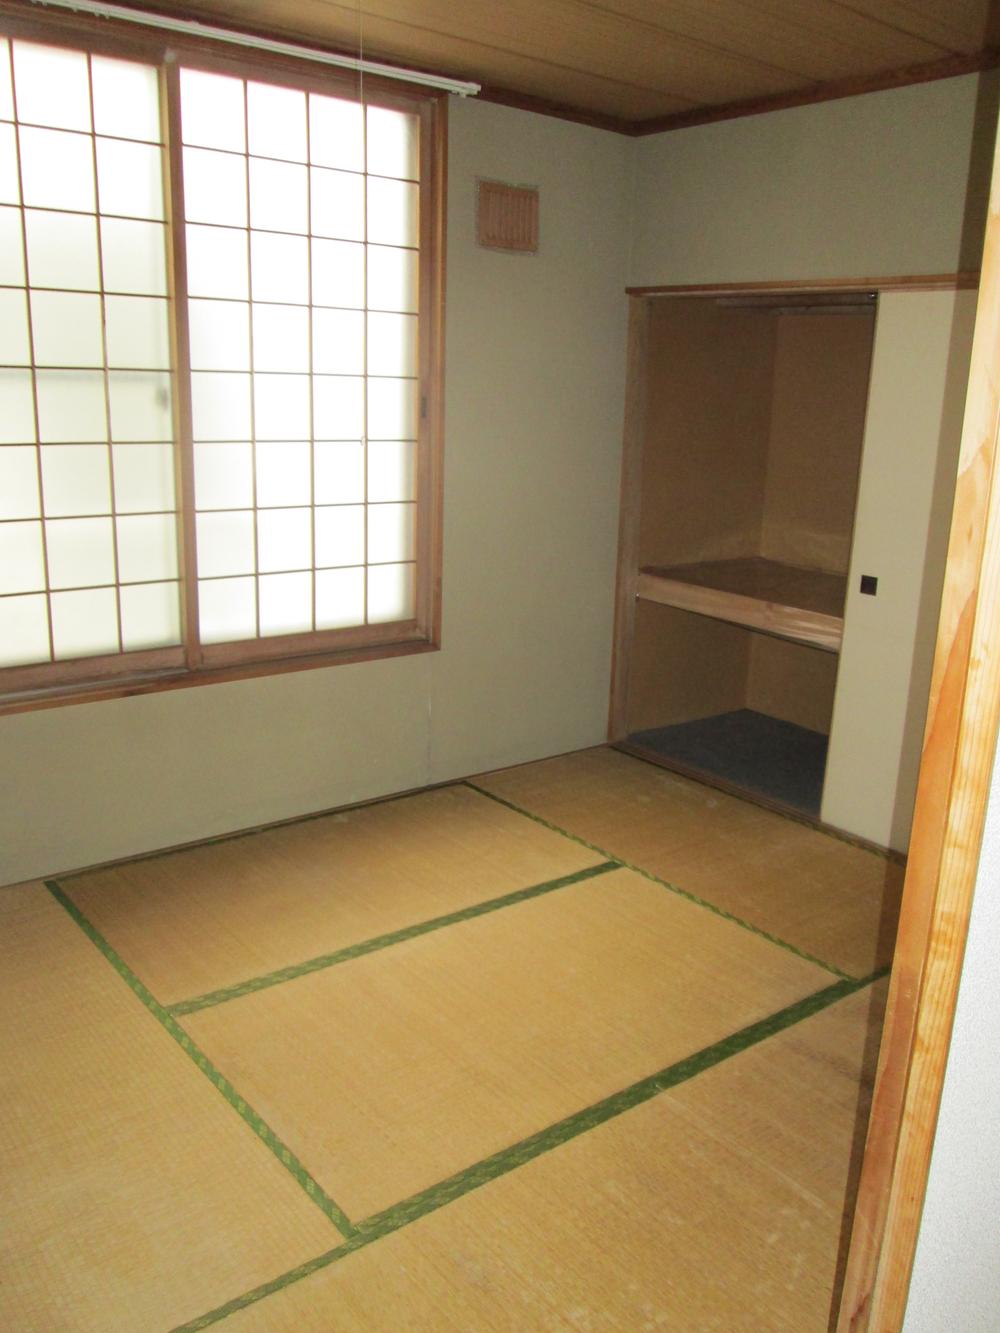 Non-living room. Building A: Japanese-style room